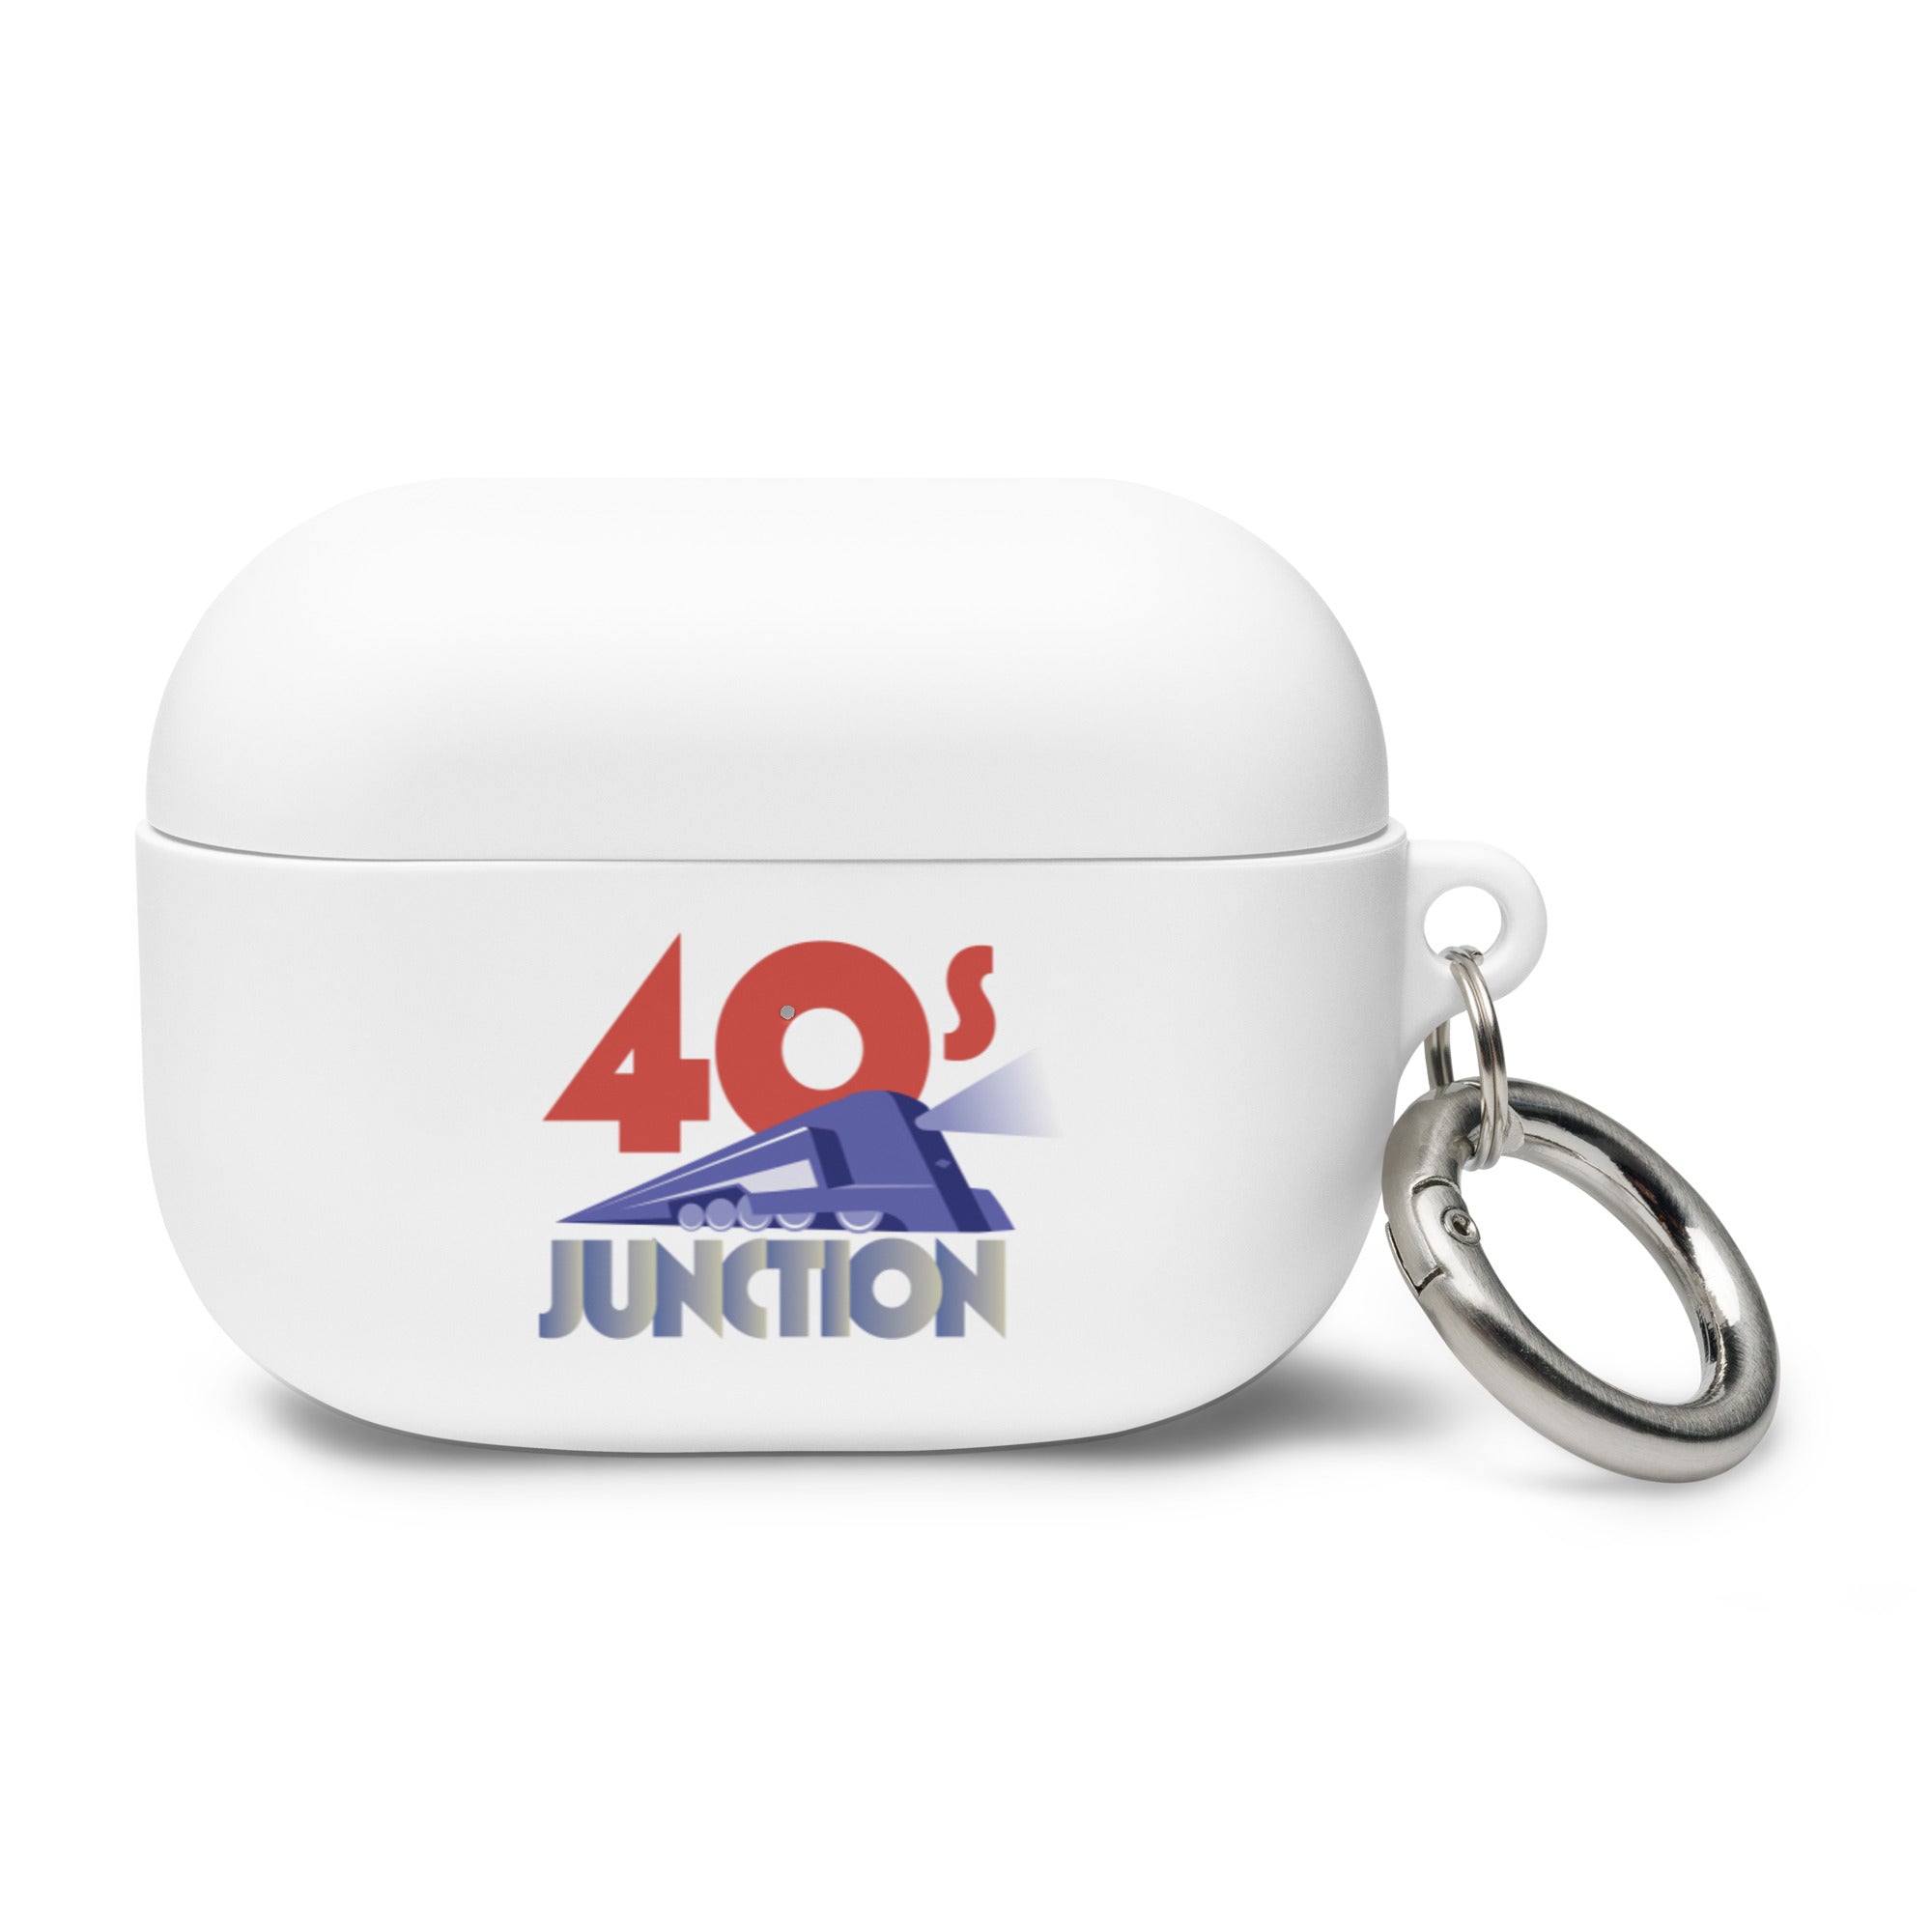 40s Junction: AirPods® Case Cover